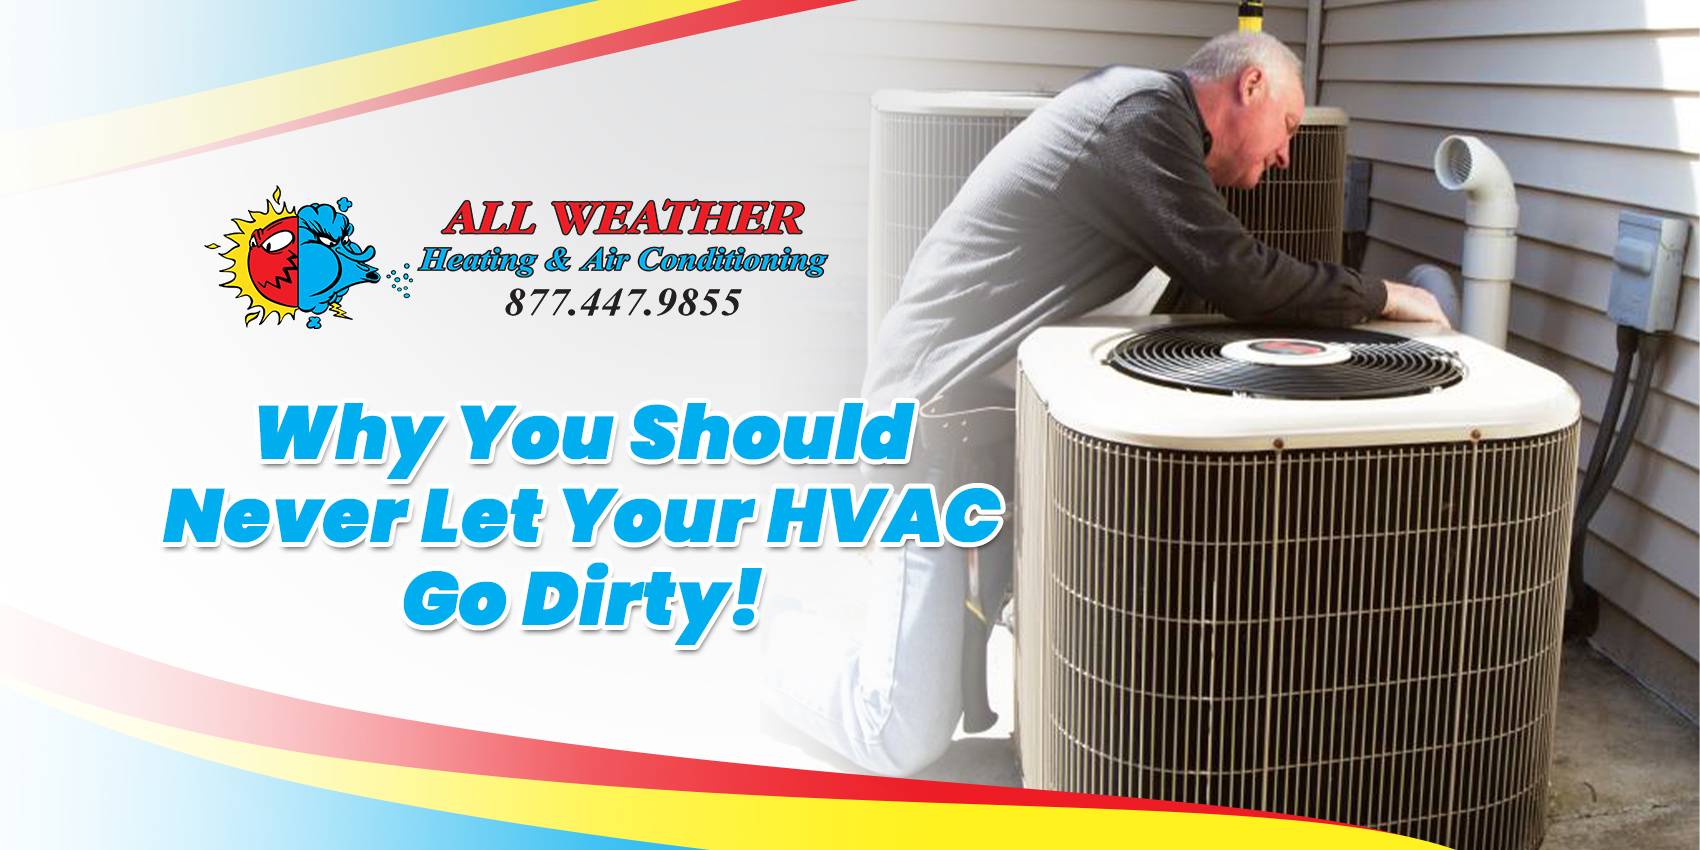 Why you should never let your HVAC go dirty